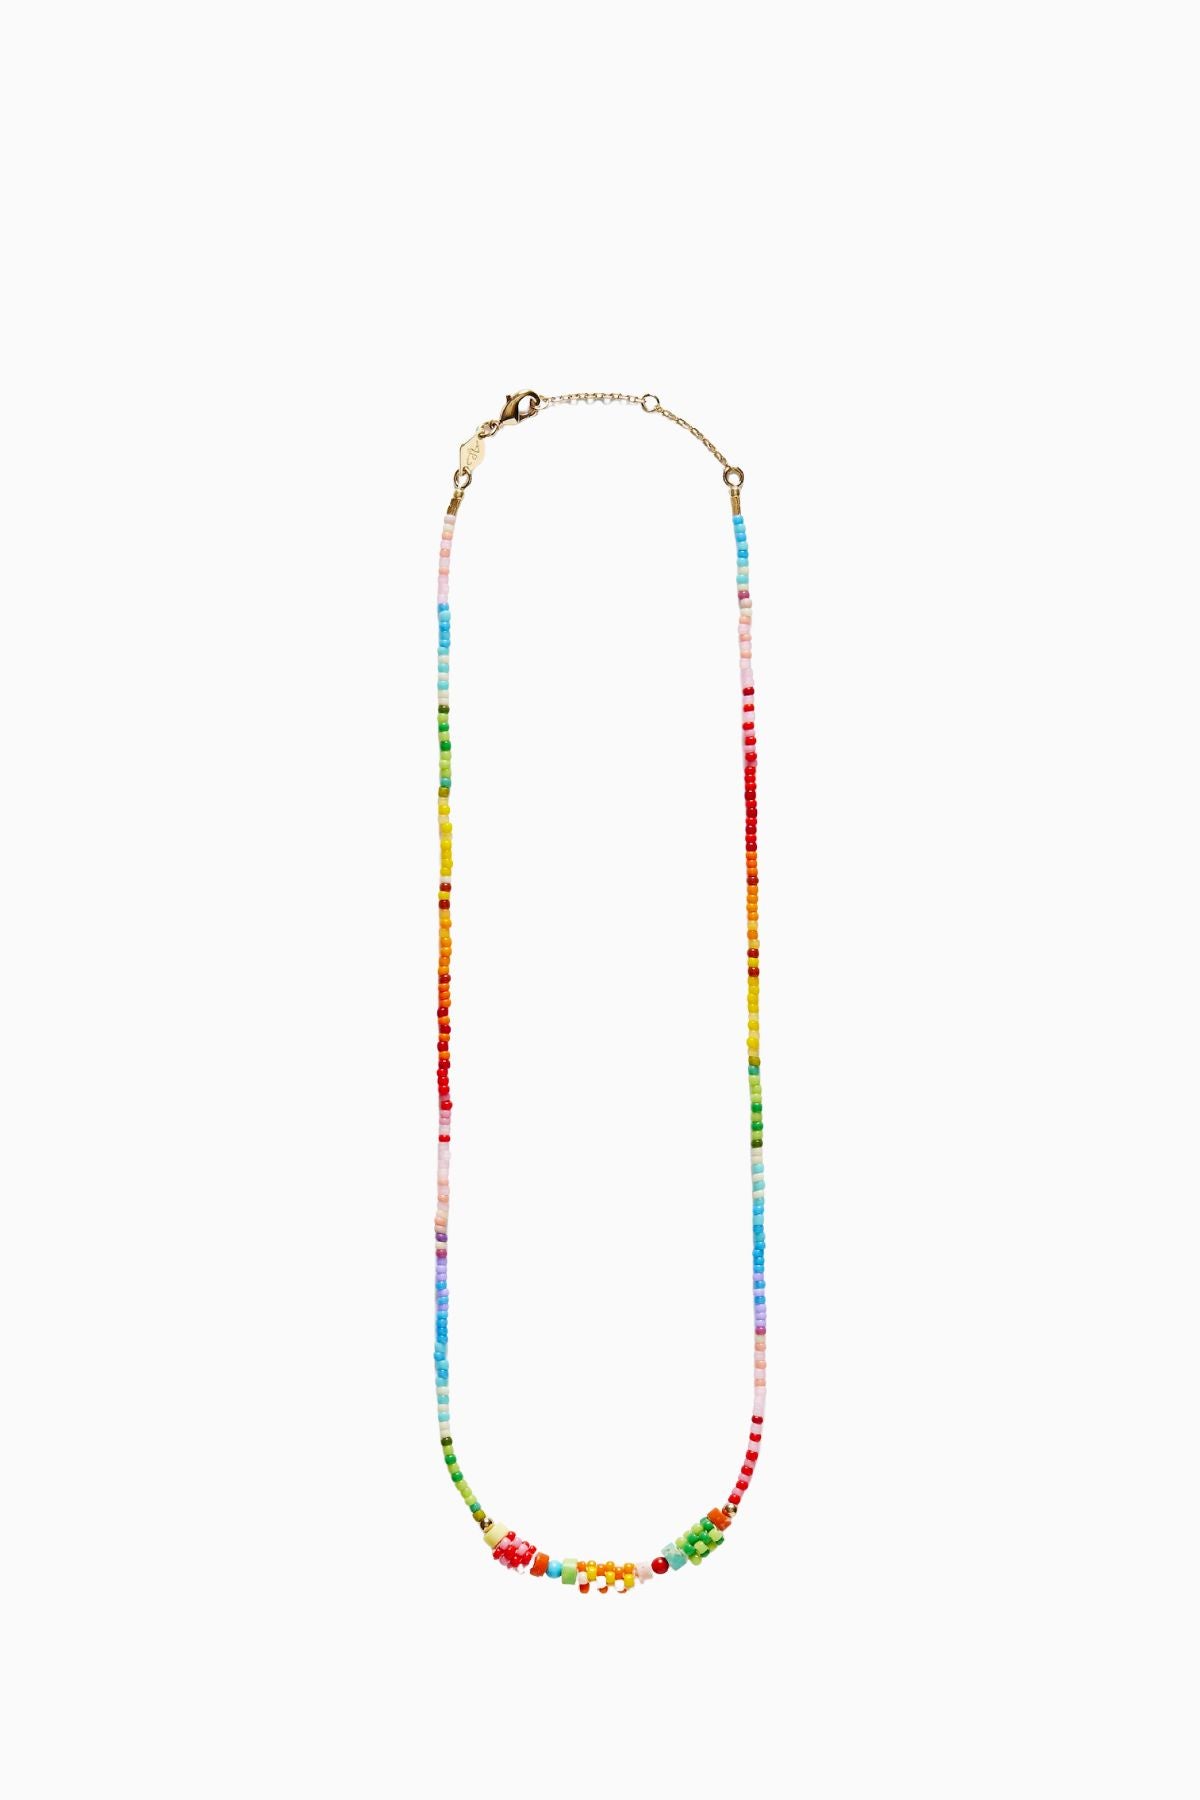 Anni Lu All Smiles Necklace - Gold